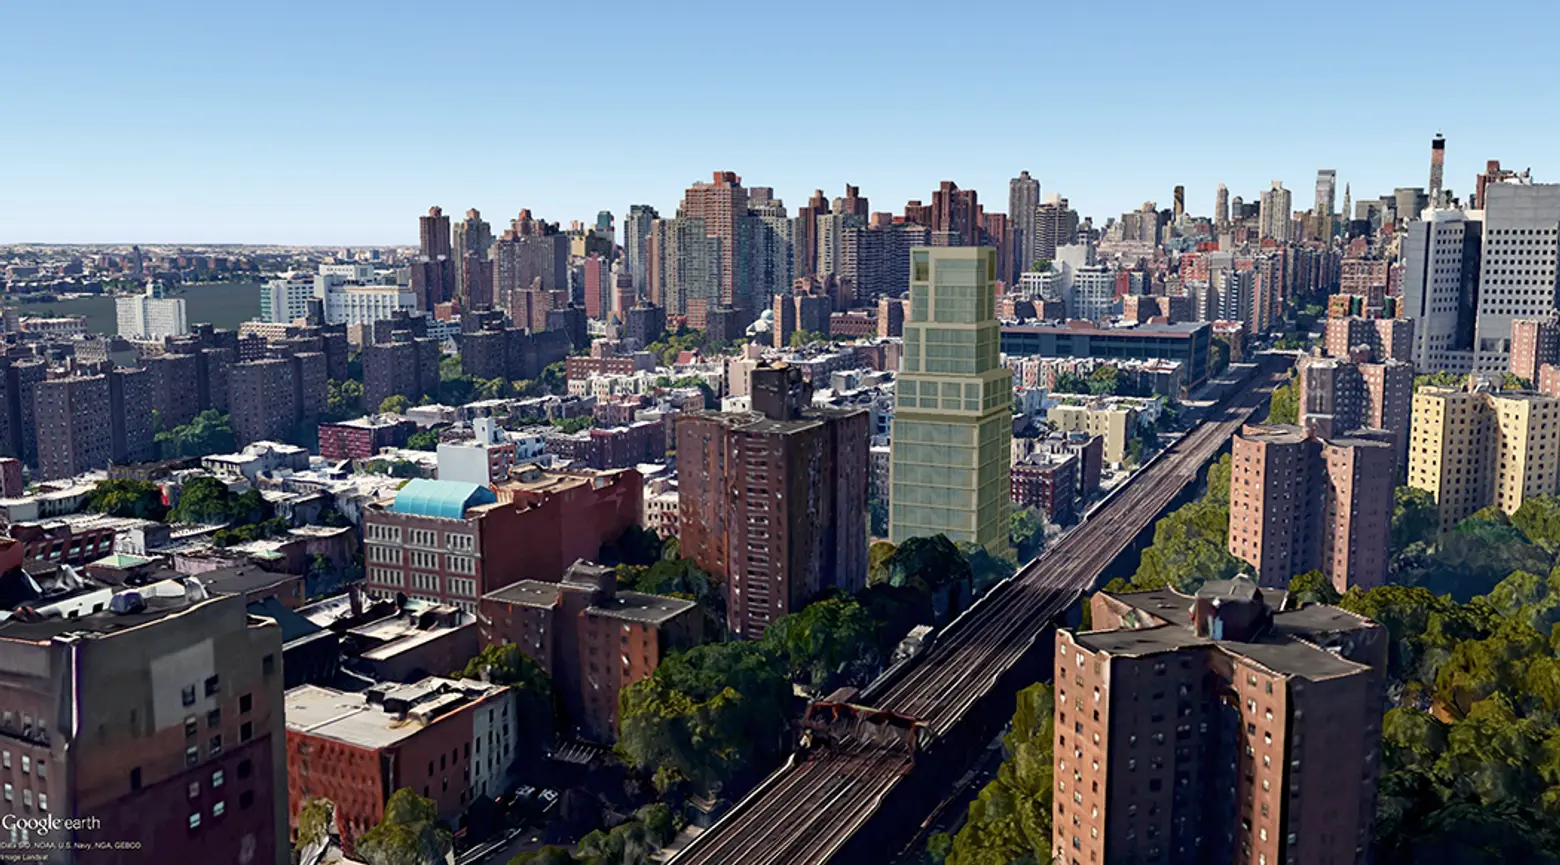 1399 Park Avenue, Heritage Real Estate Partners, Terrace on the Park, Goldstein Hill & West